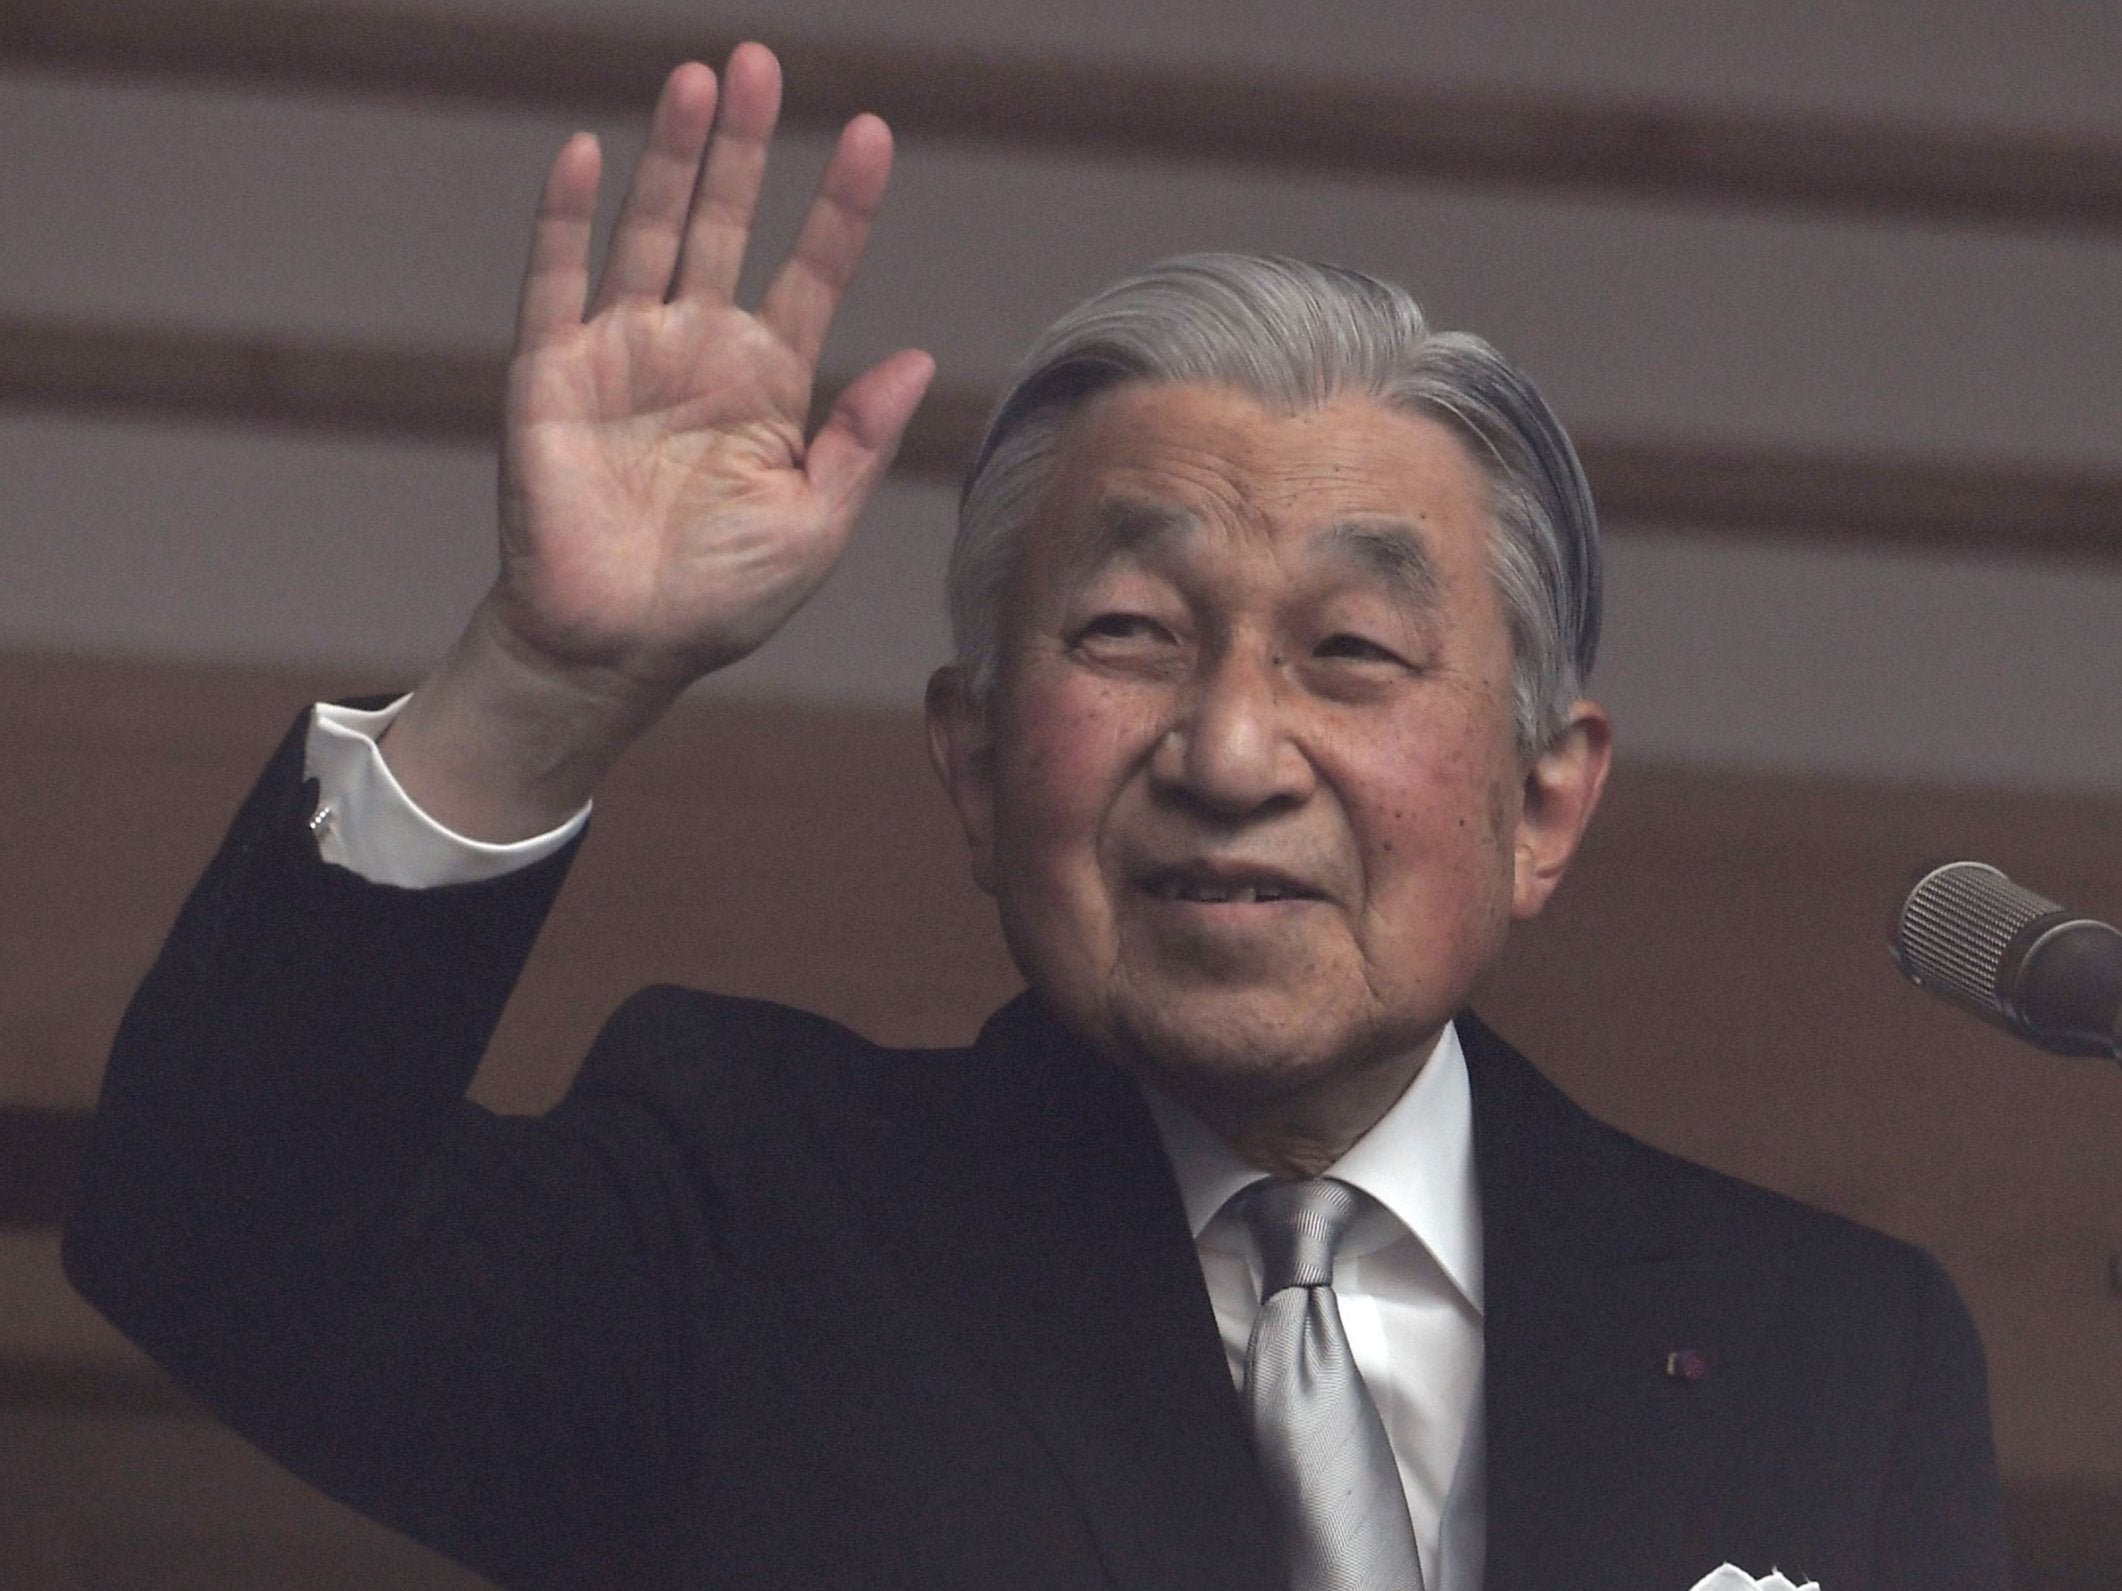 Emperor Akihito waves to well-wishers at the Imperial Palace on his 85th birthday